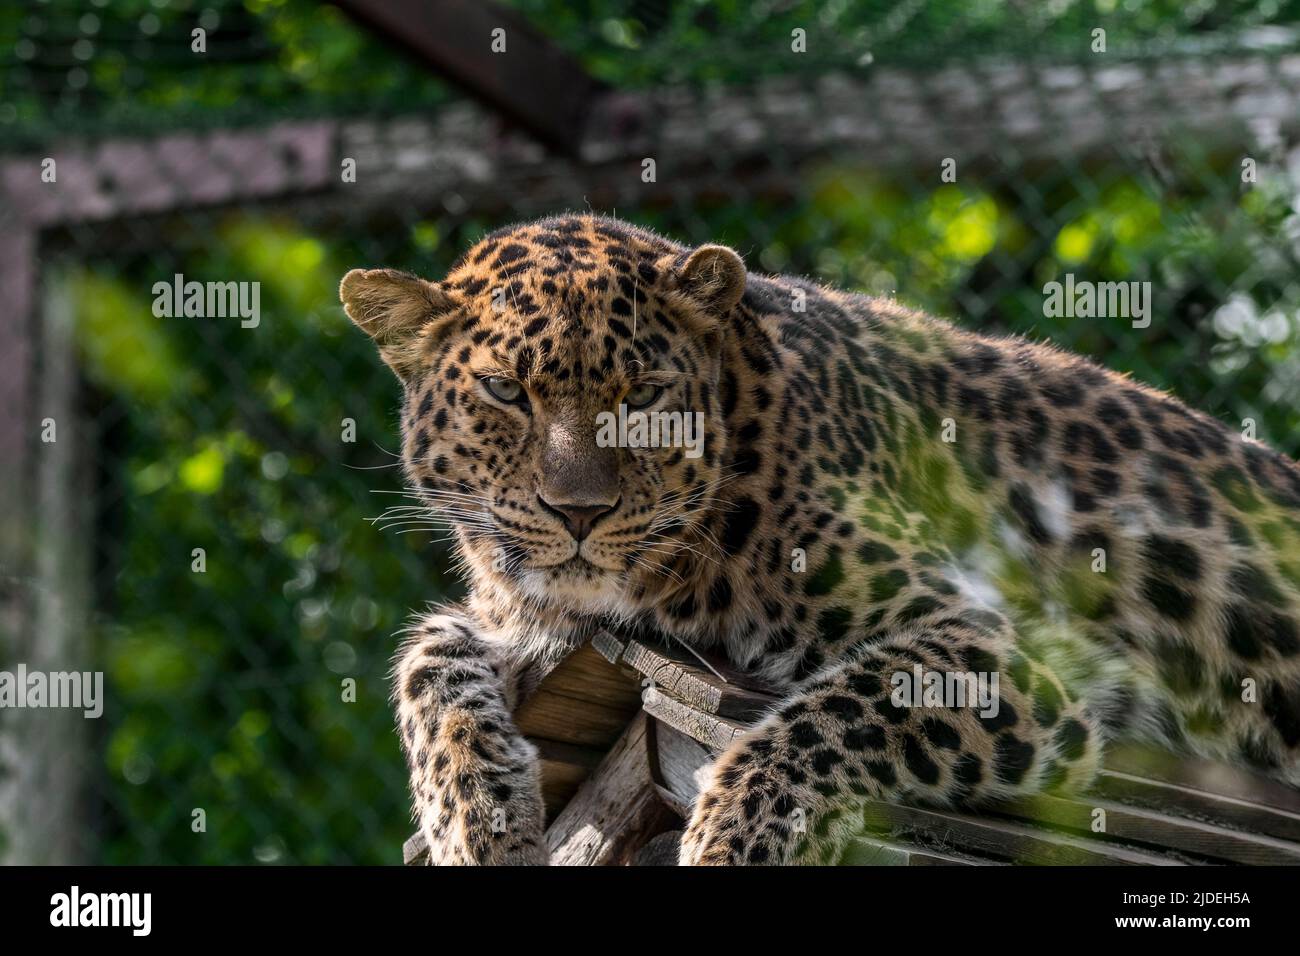 Captive Amur leopard (Panthera pardus orientalis) close-up portrait in enclosure of zoo / zoological park, native to Russia and northern China Stock Photo